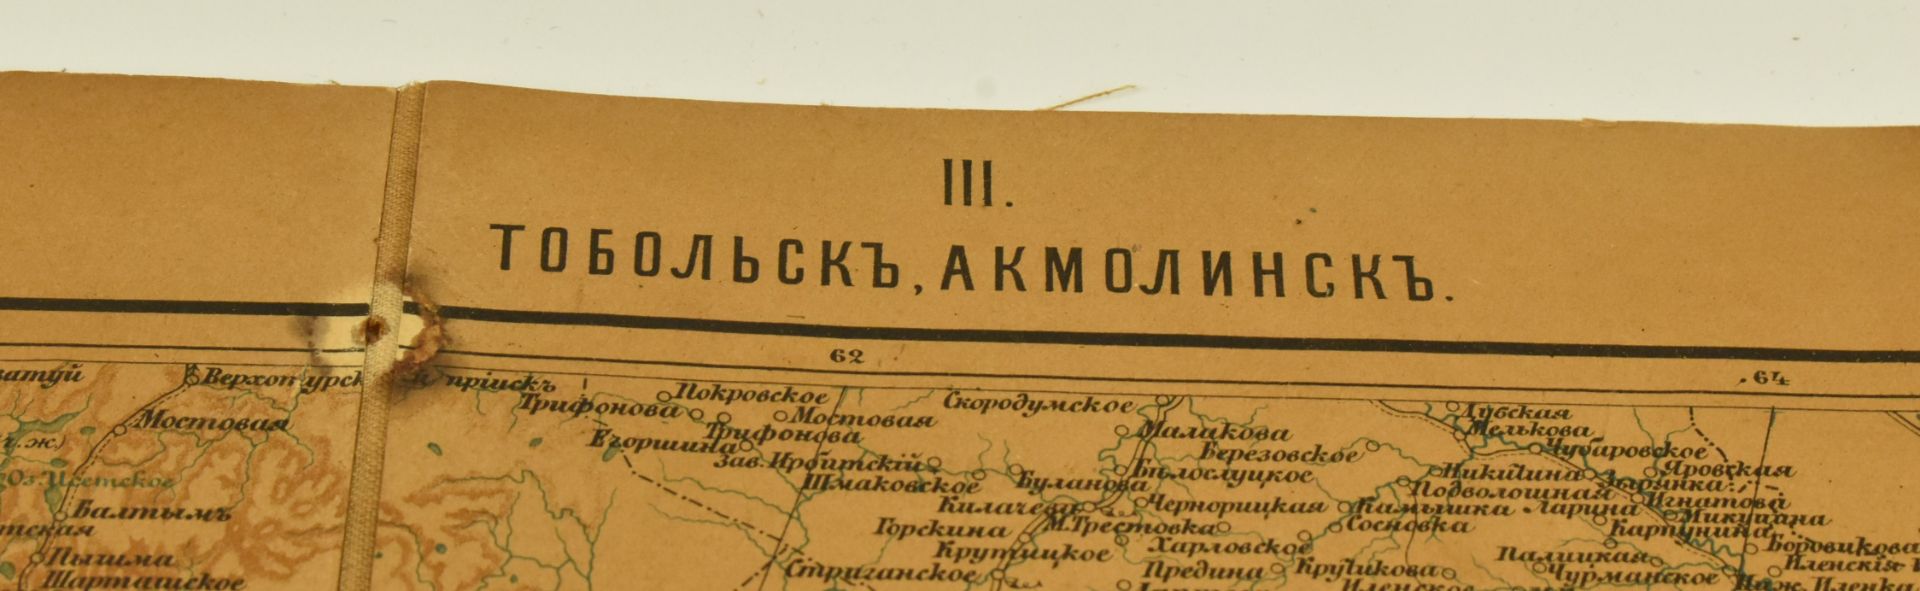 EARLY 20TH CENTURY MAP OF THE TRANS-SIBERIAN RAILWAY - Image 4 of 8